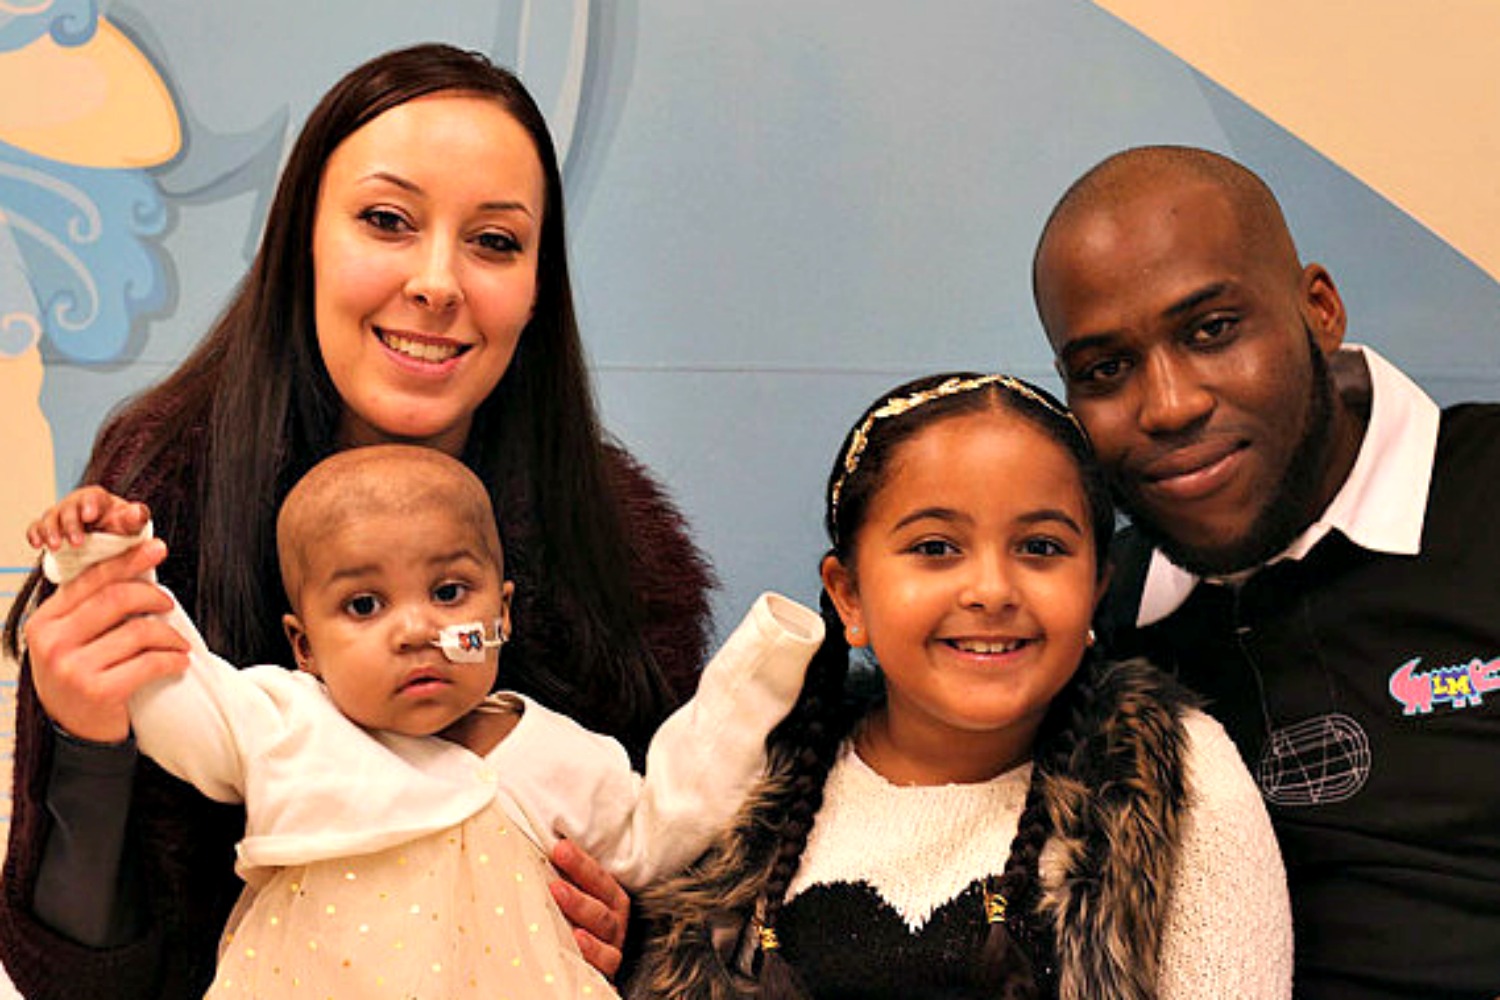 Layla Richards, baby girl that defeated leukemia thanks to a pioneering treatment